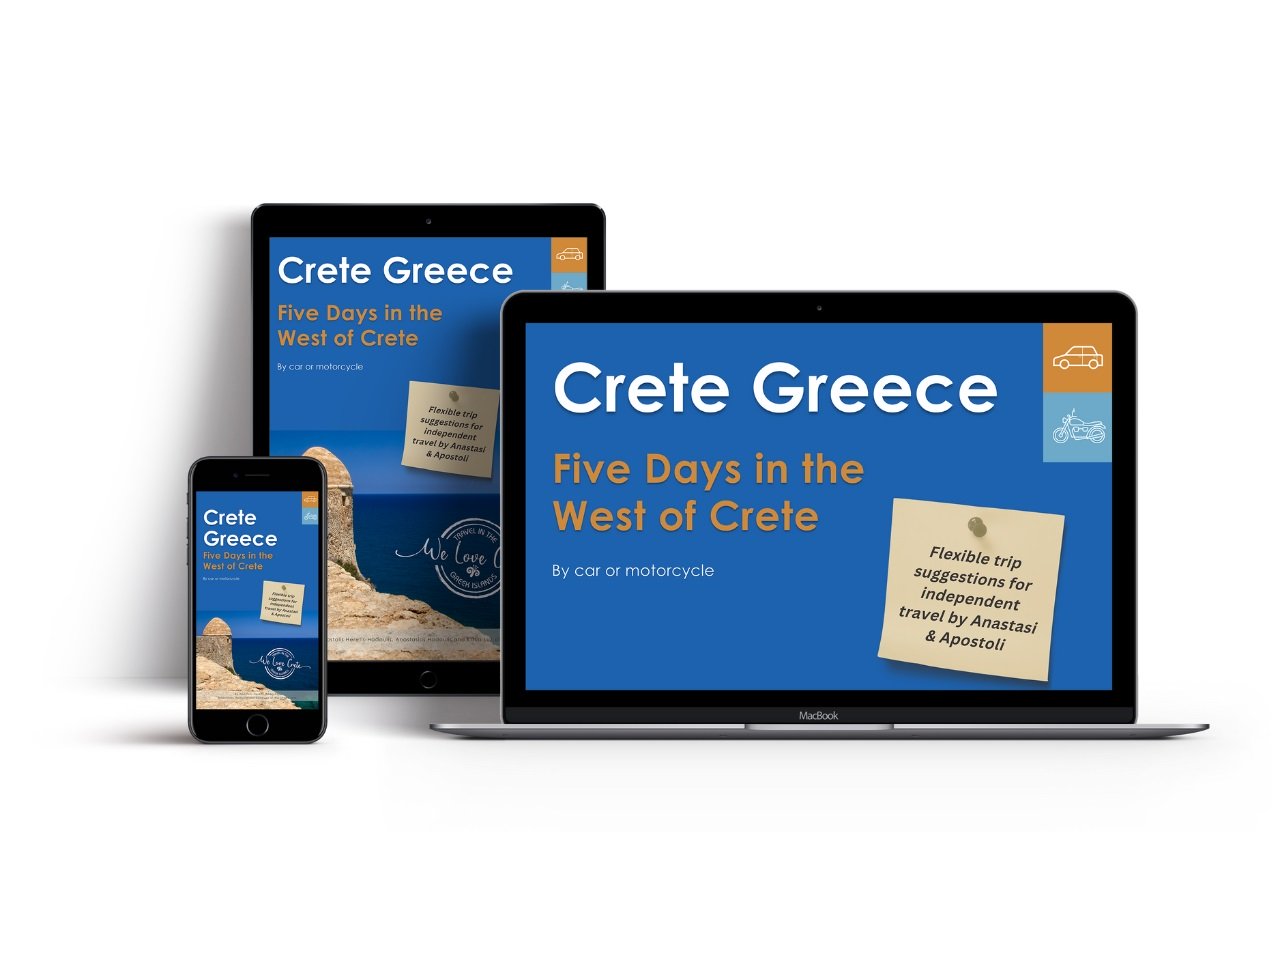 5 Days in the West of Crete by Car or Motorcycle